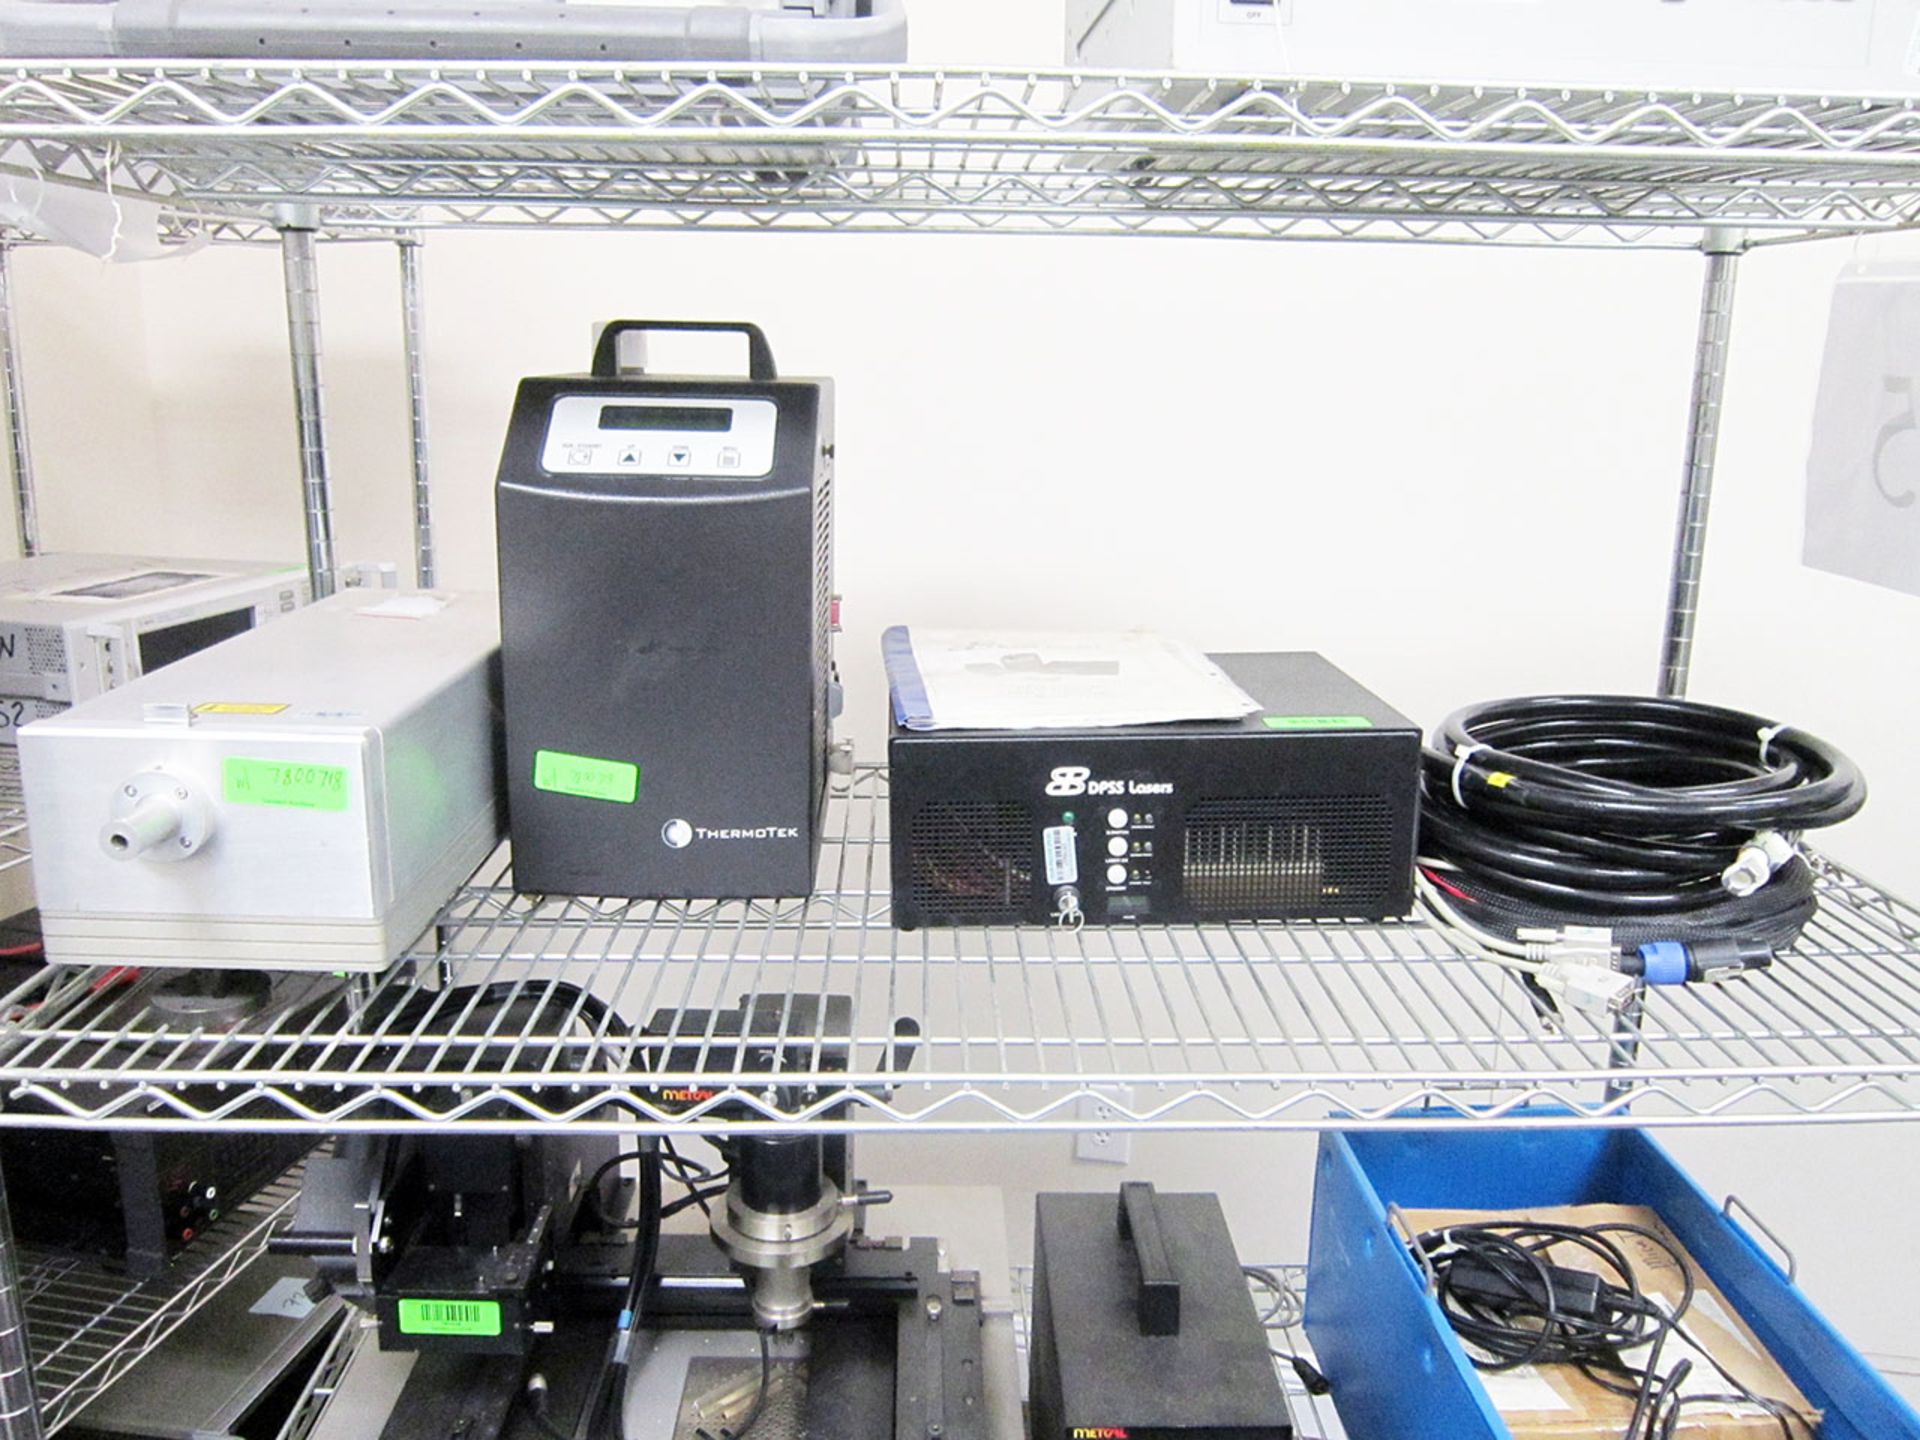 DPSS Lasers 3510-100 UV Laser System with Thermotek T255p Chiller and All Cables